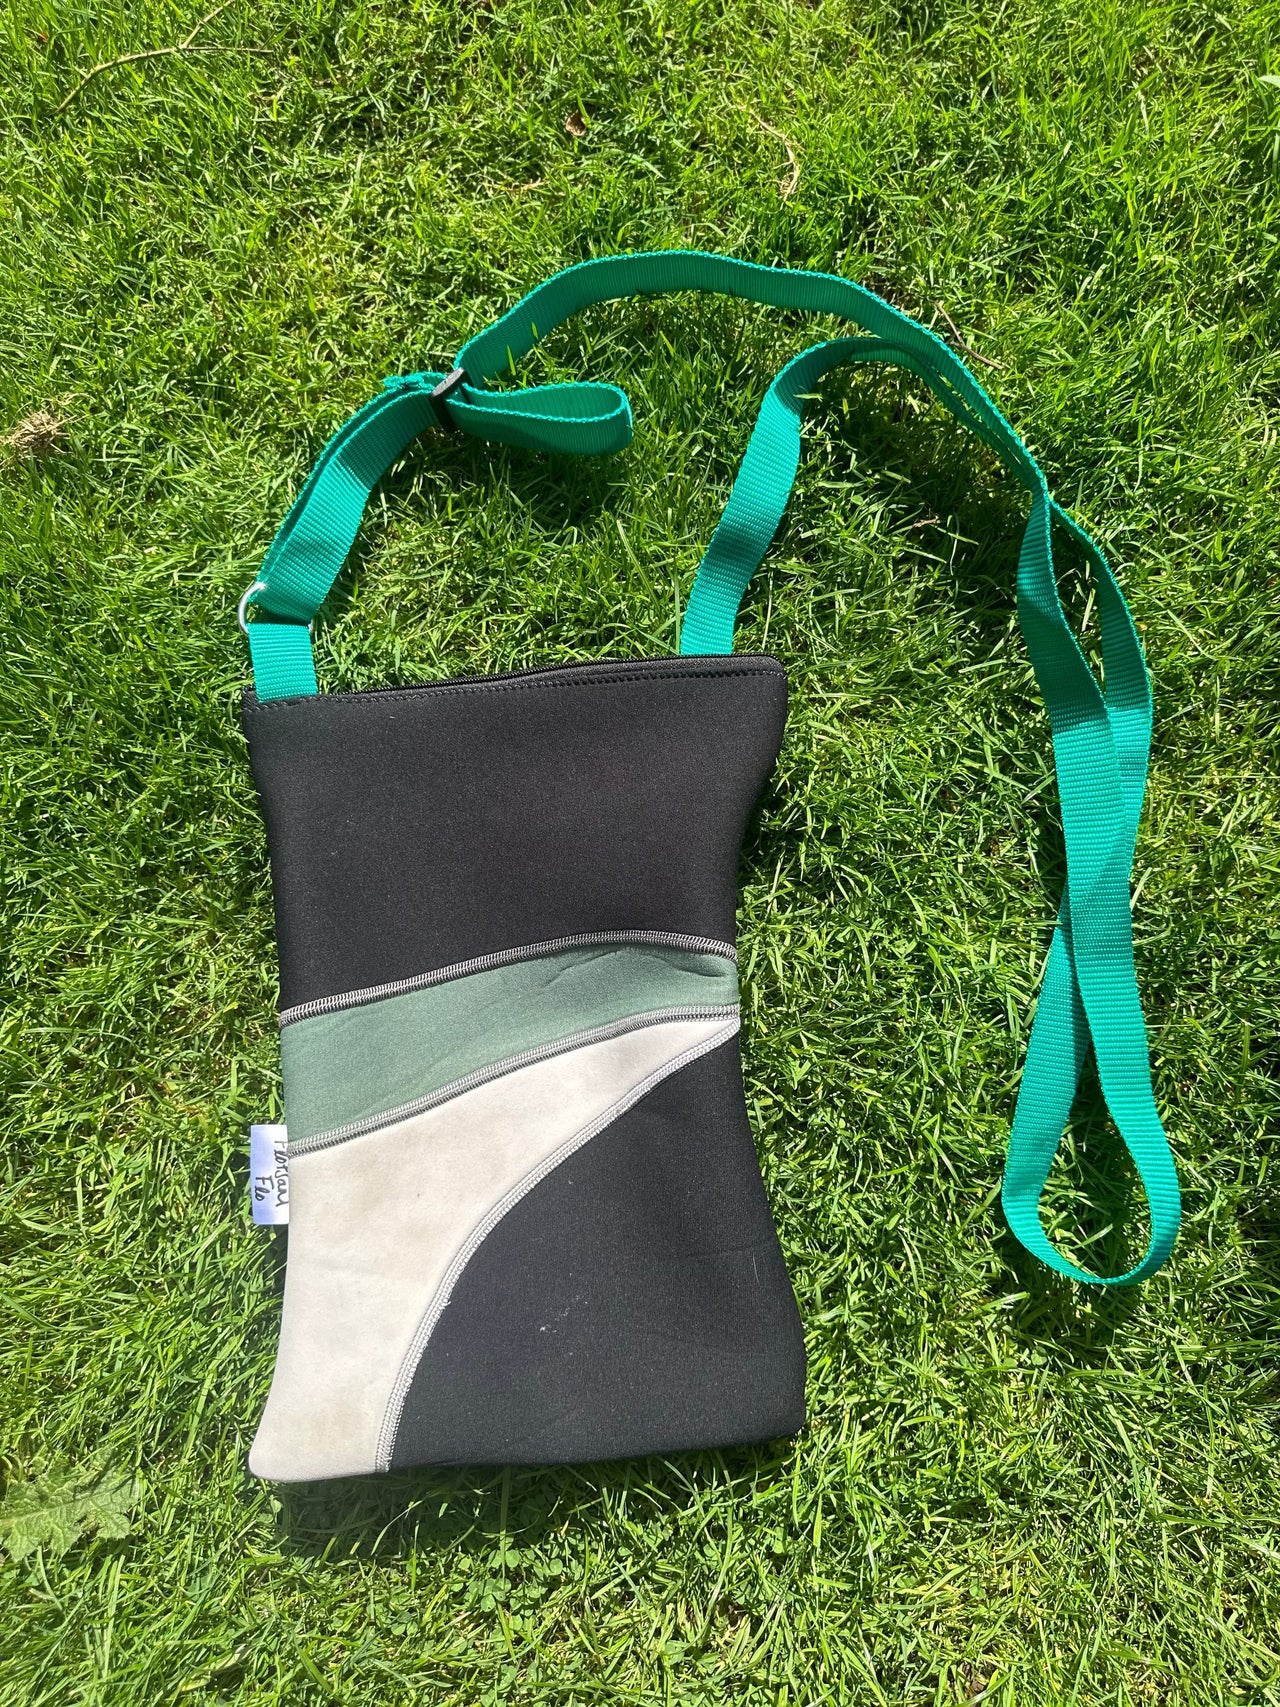 I used to be a Wetsuit - Cross Body Bag